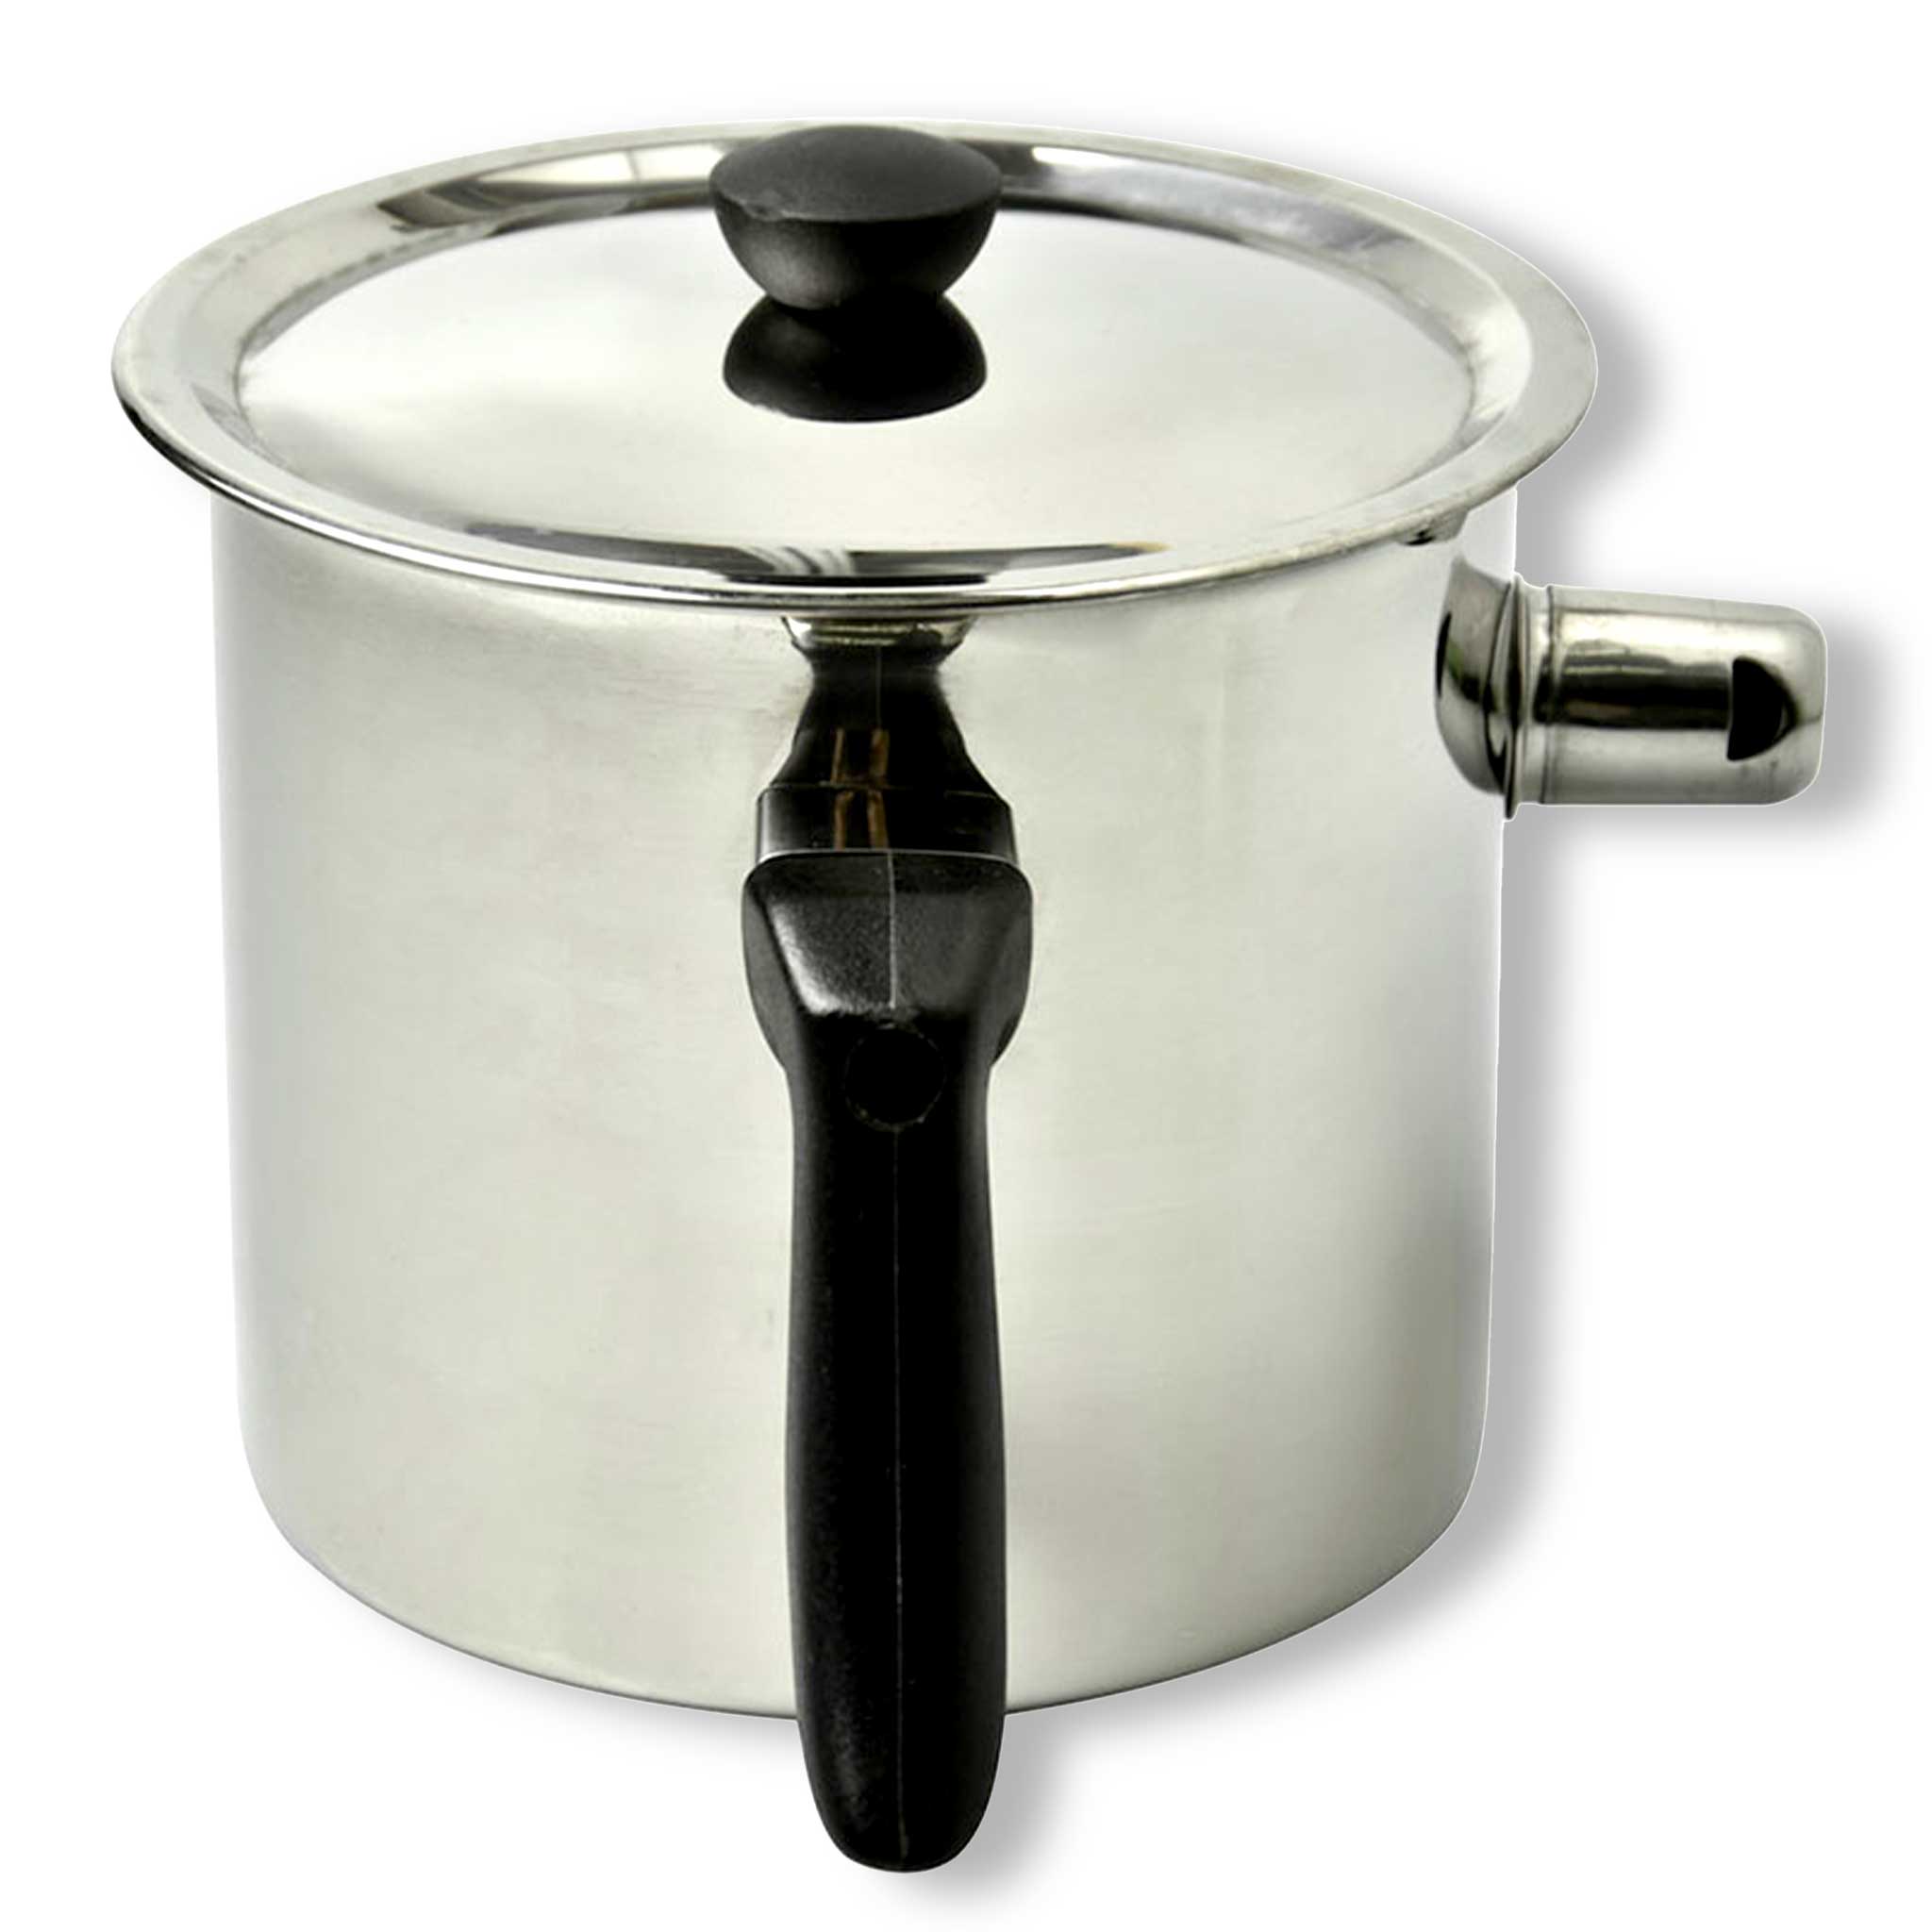 Stainless Steel Double Boiler